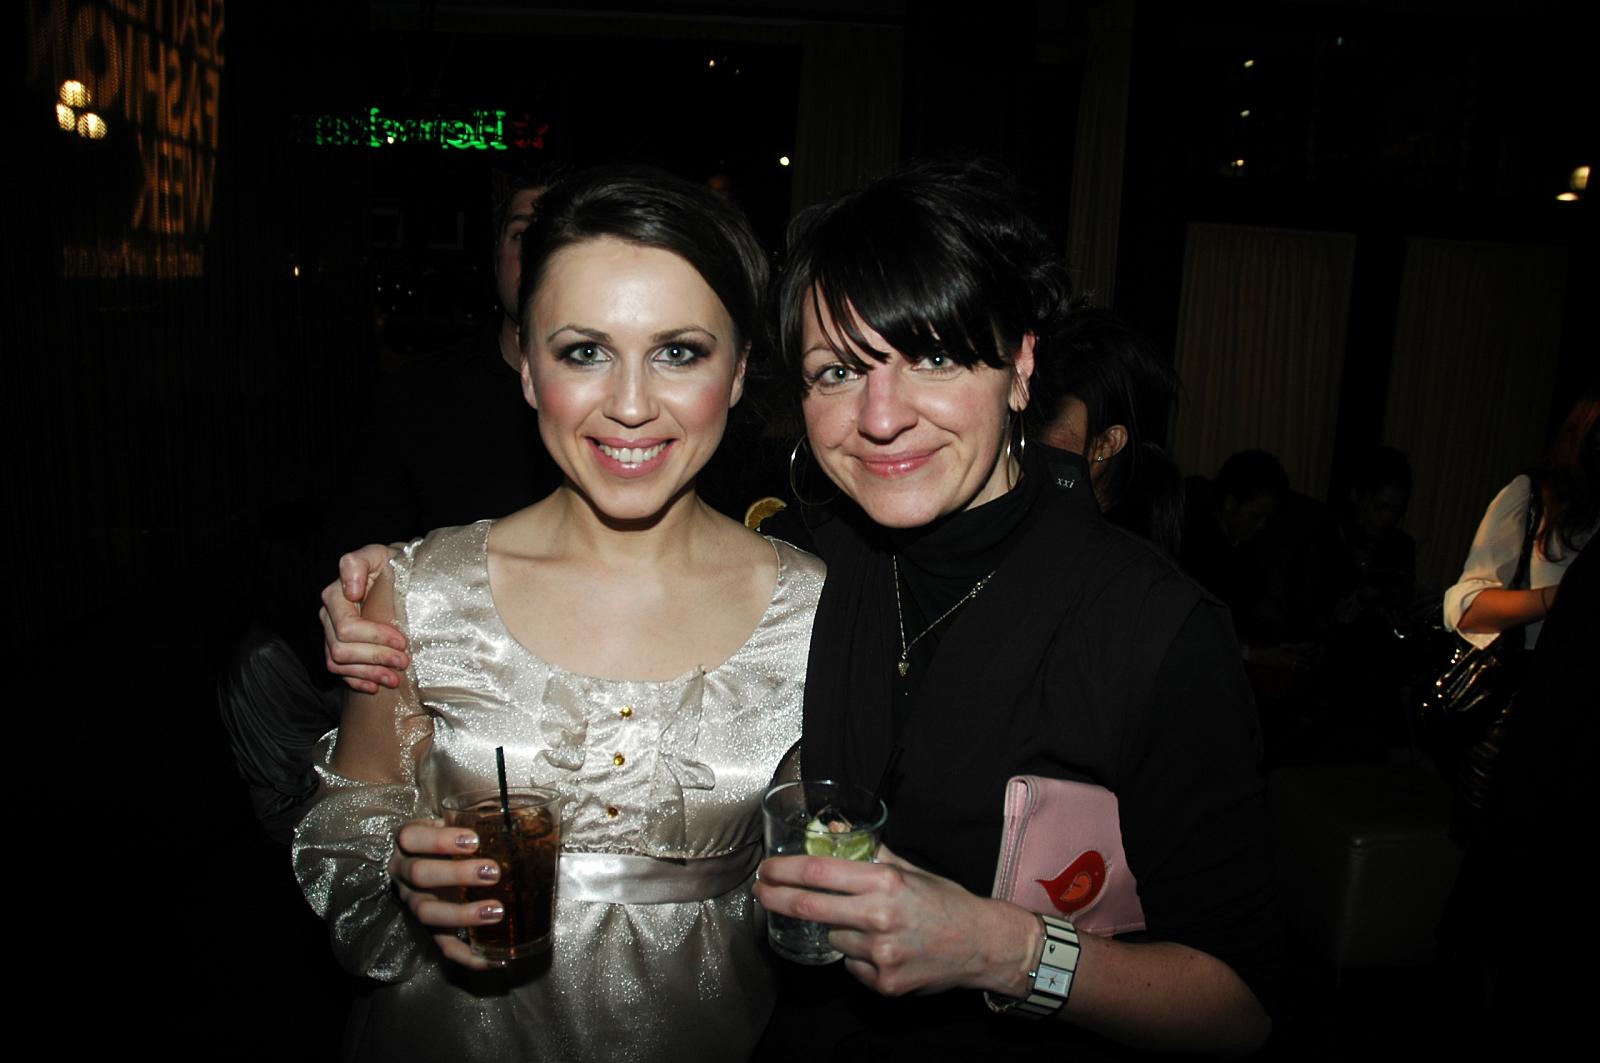 two women pose for a picture with their drinks